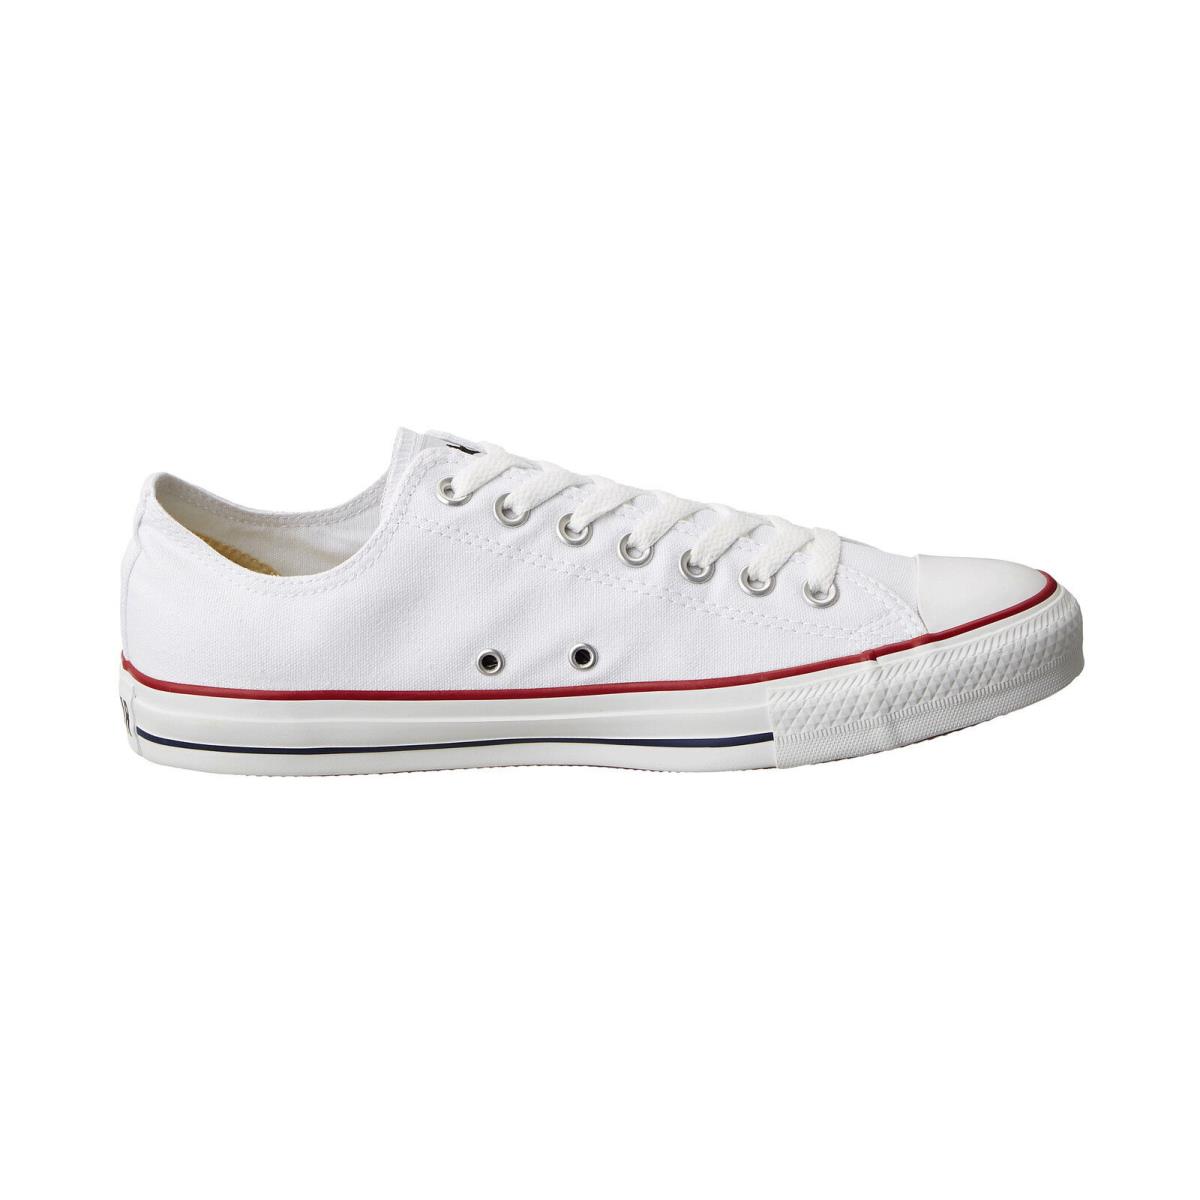 Converse Men Shoes All Star Classic Chuck Taylor Low Top Optical White Sneakers - White, Manufacturer: Optical White